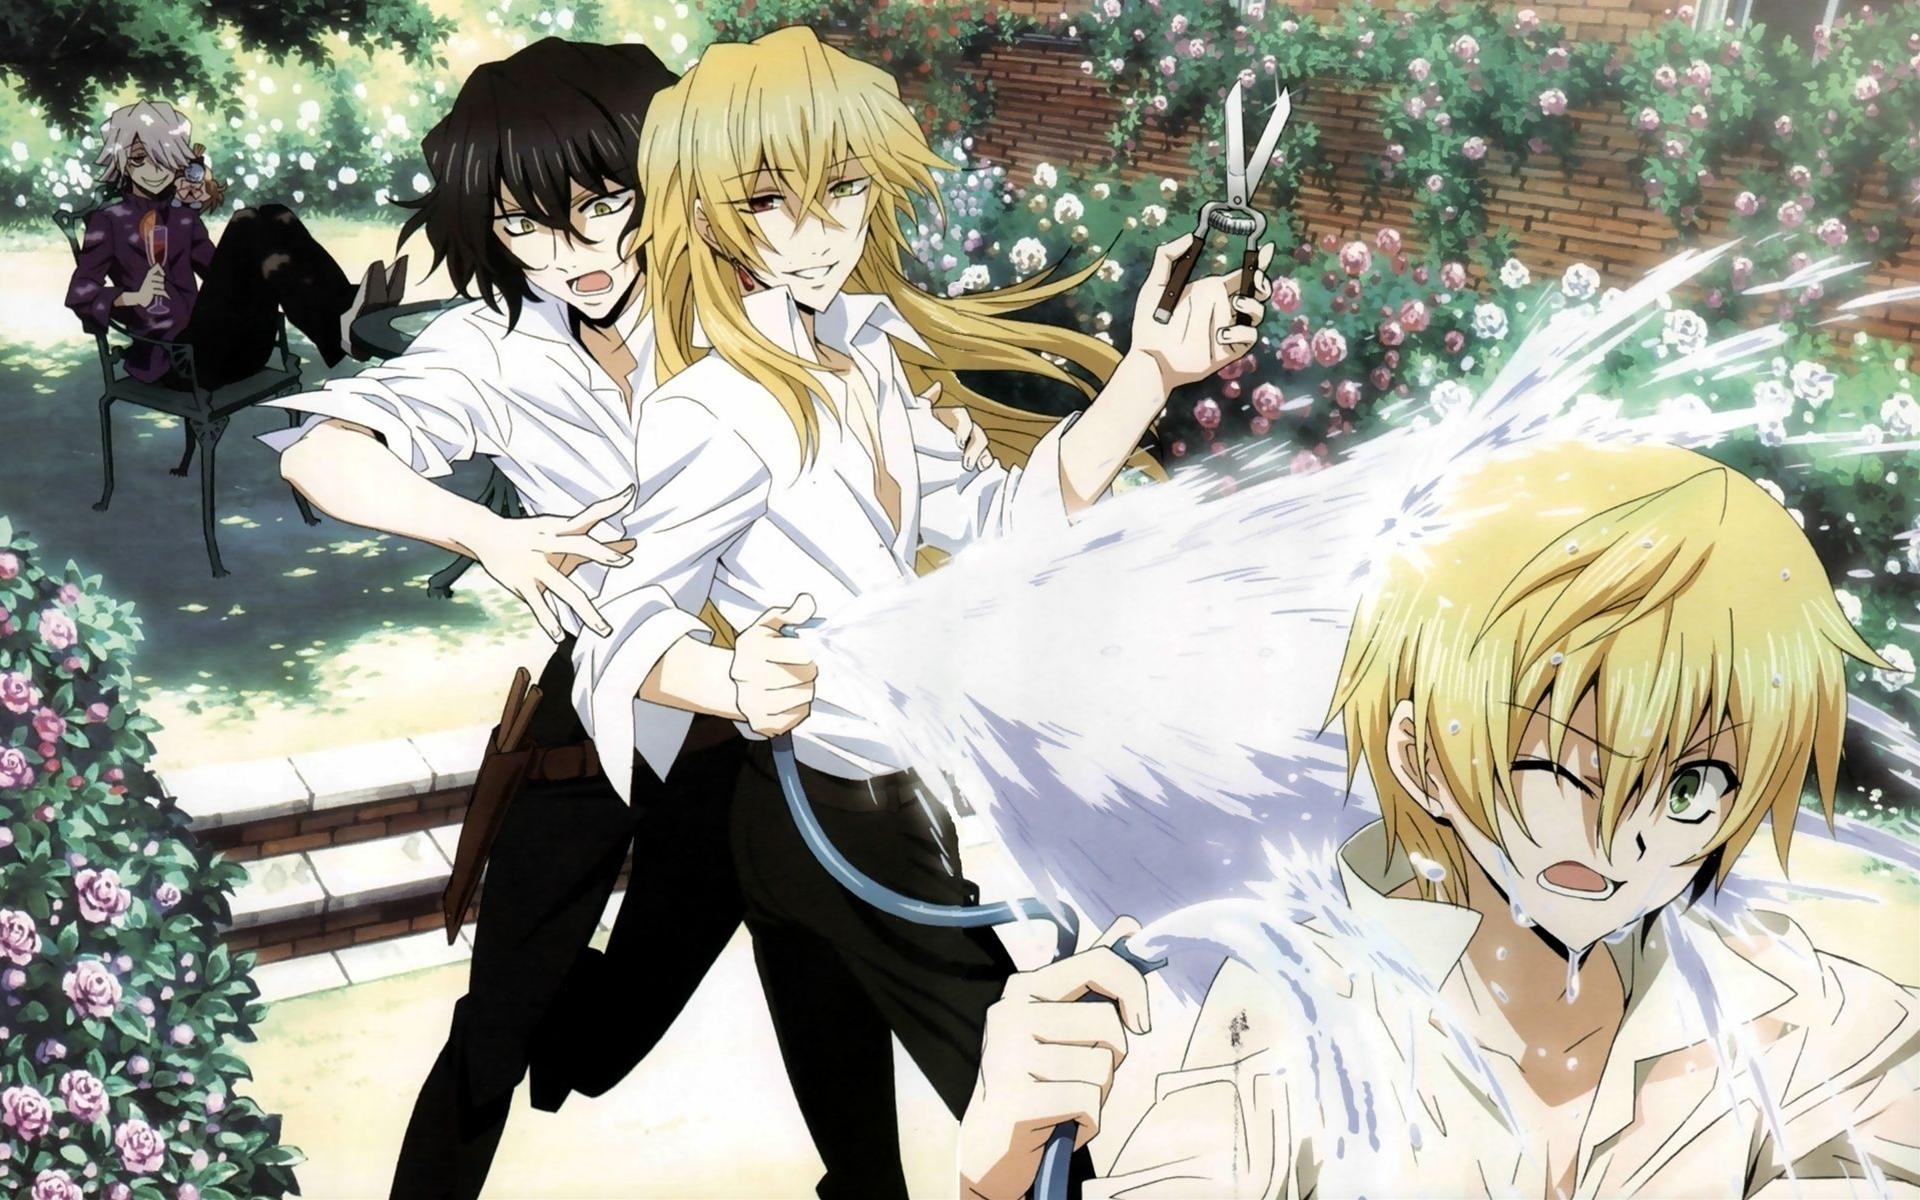 Anime characters from Pandora Hearts - Vincent, Oz, Gilbert, Xerxes, and Emily - gathered in a desktop wallpaper.